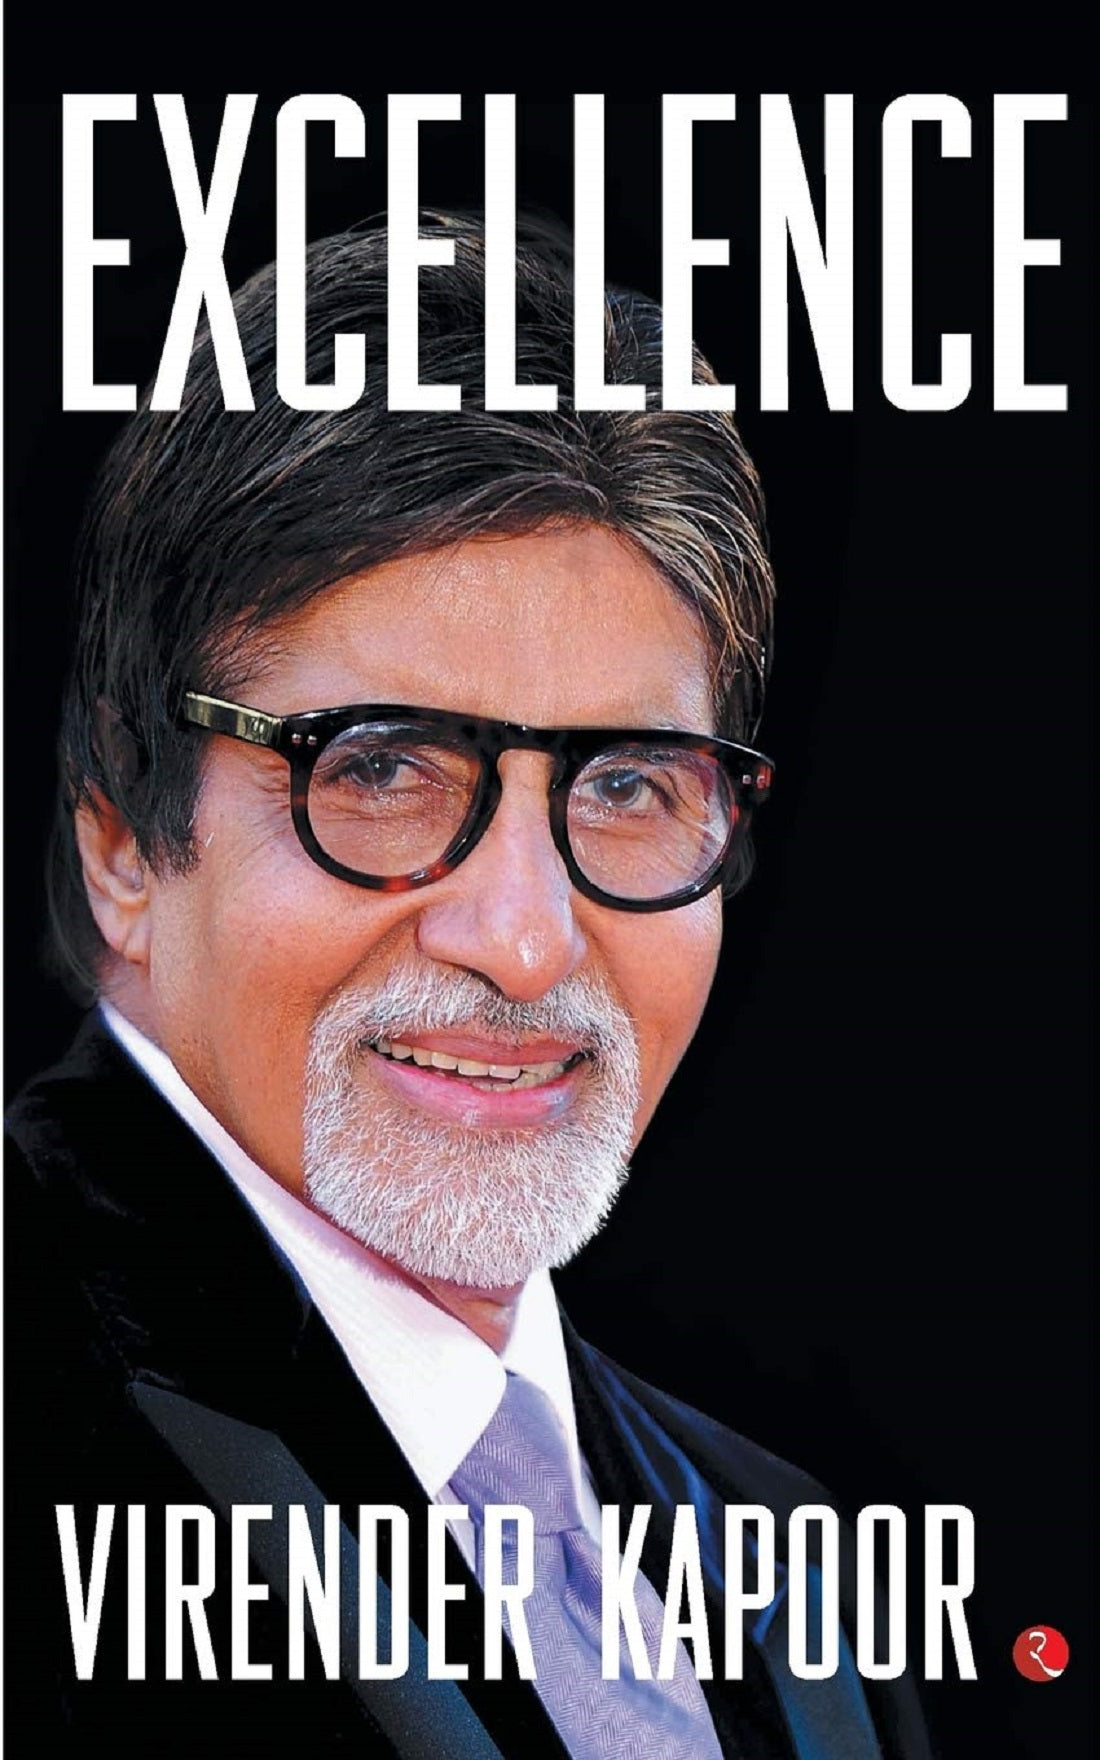 EXCELLENCE THE AMITABH BACHCHAN WAY